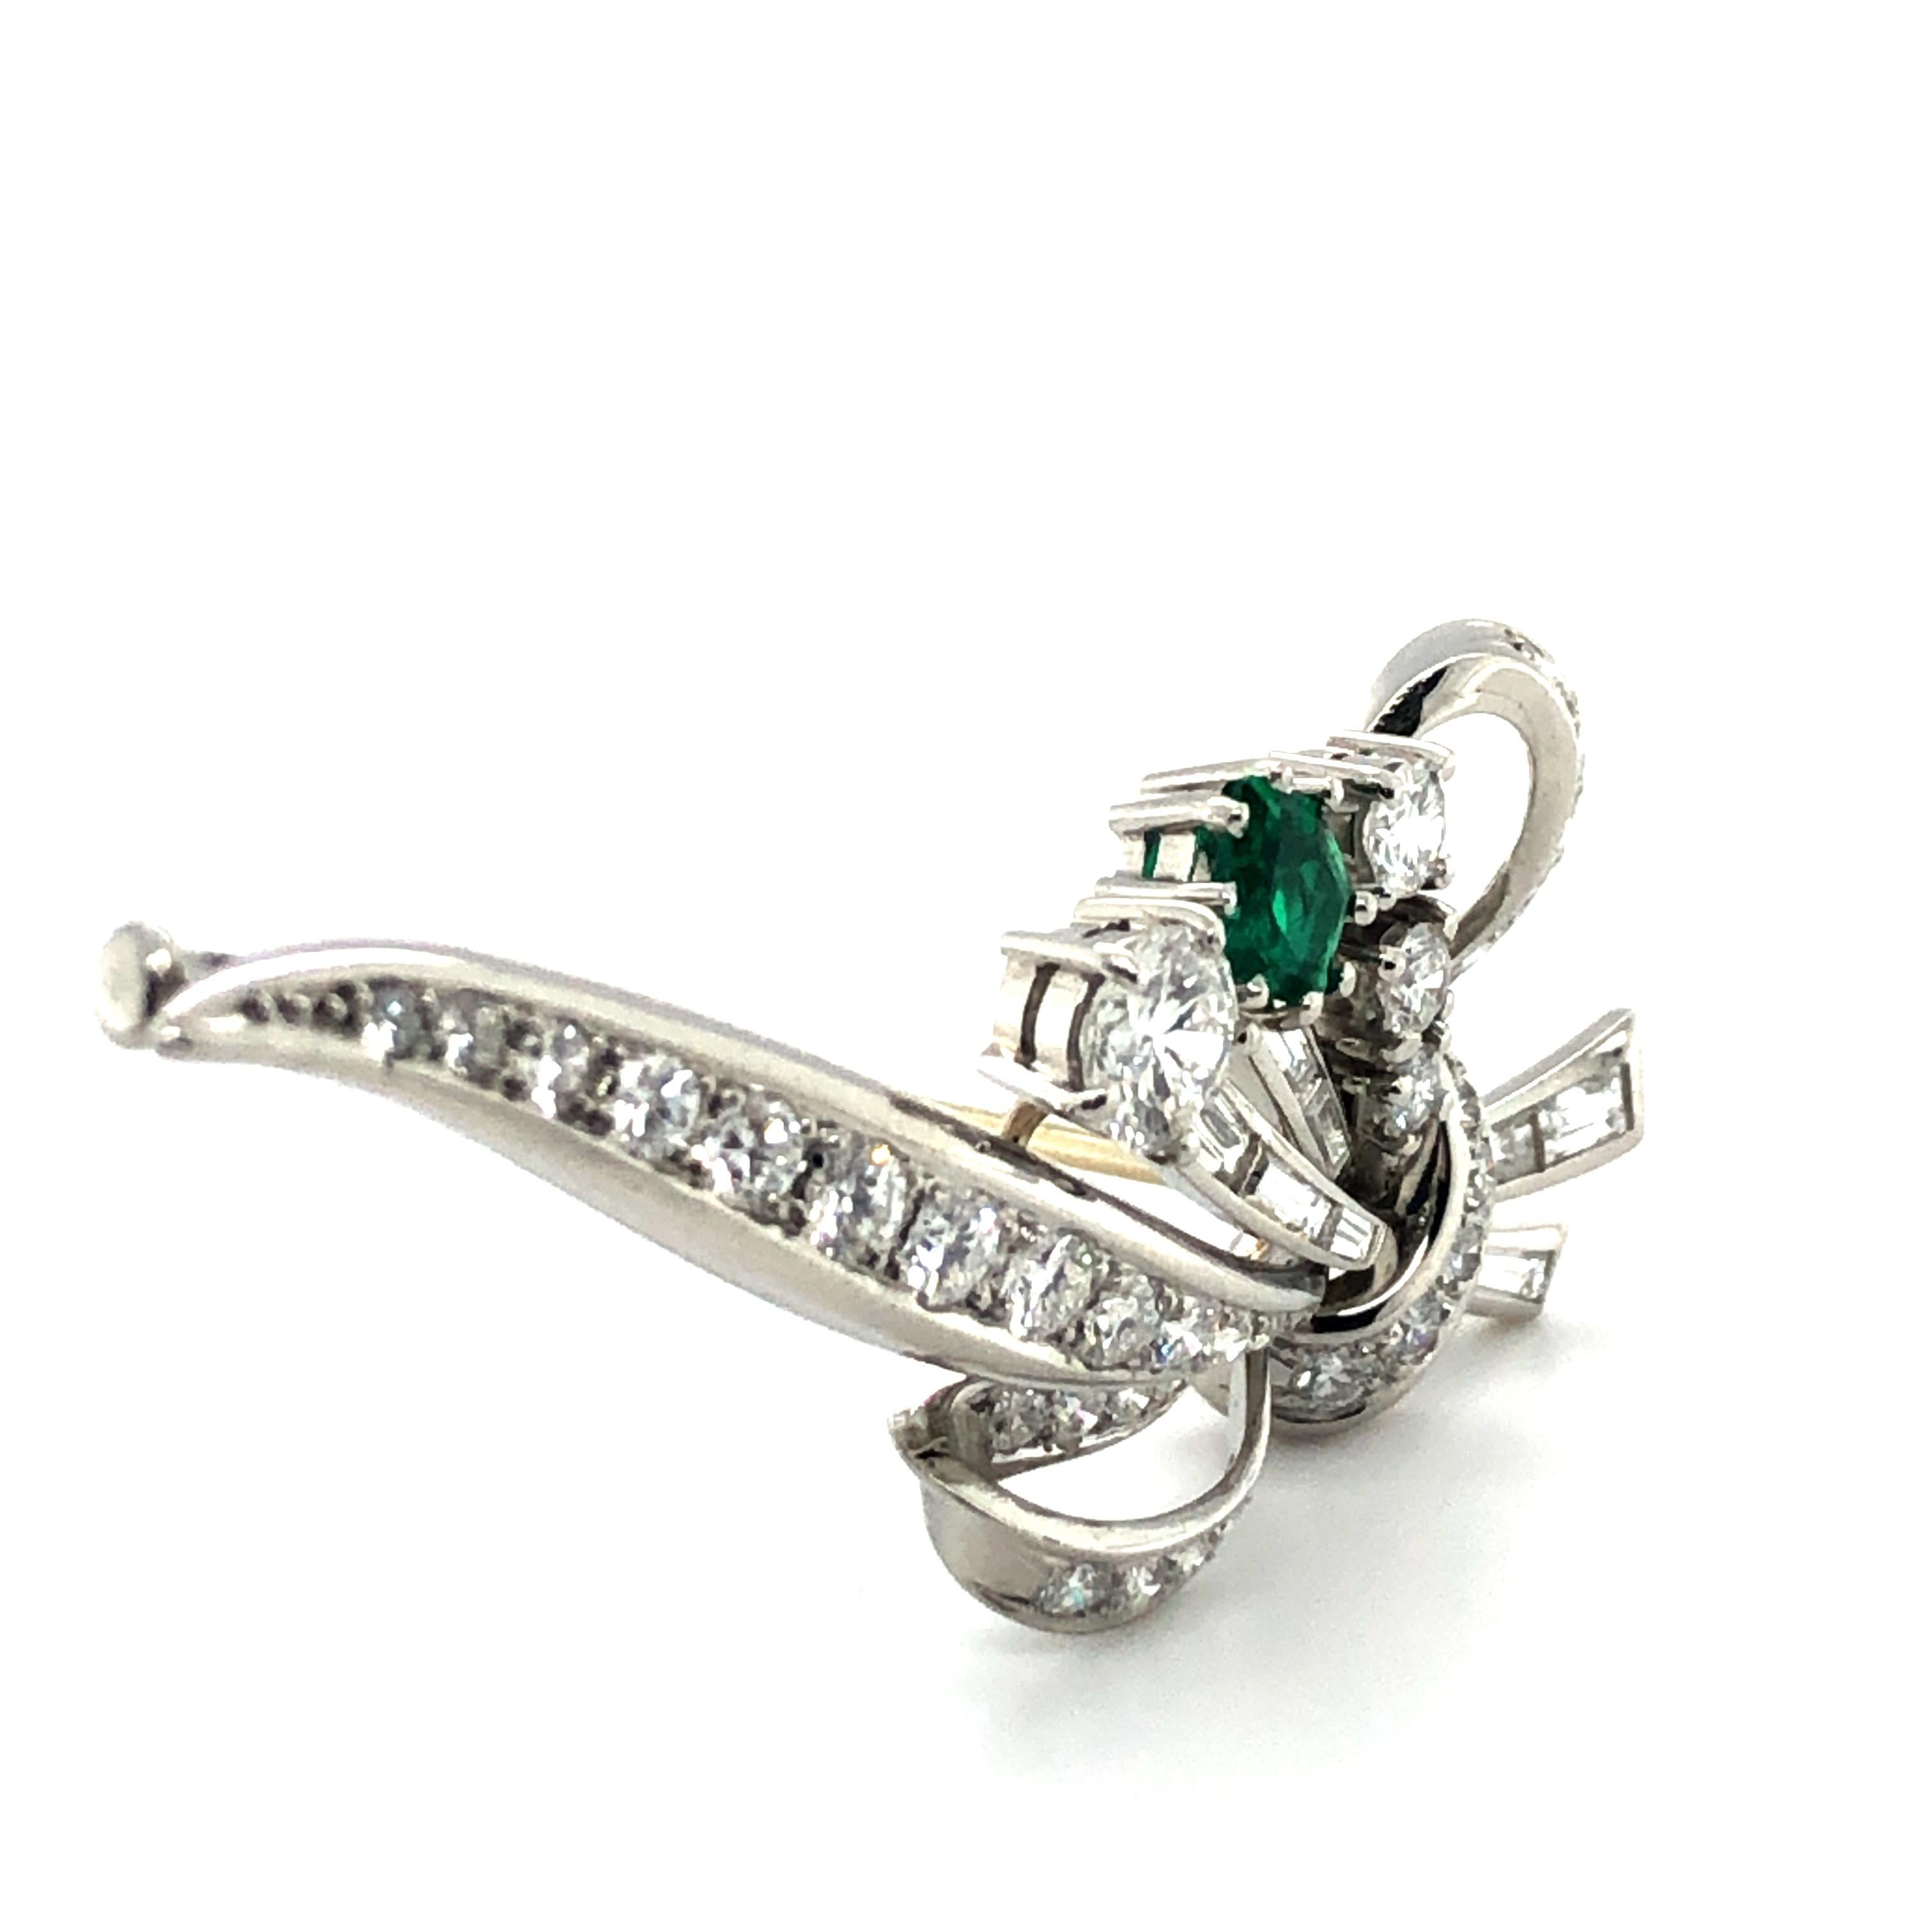 Elegant Meister Diamond Brooch with Emerald in Platinum 950 For Sale 2